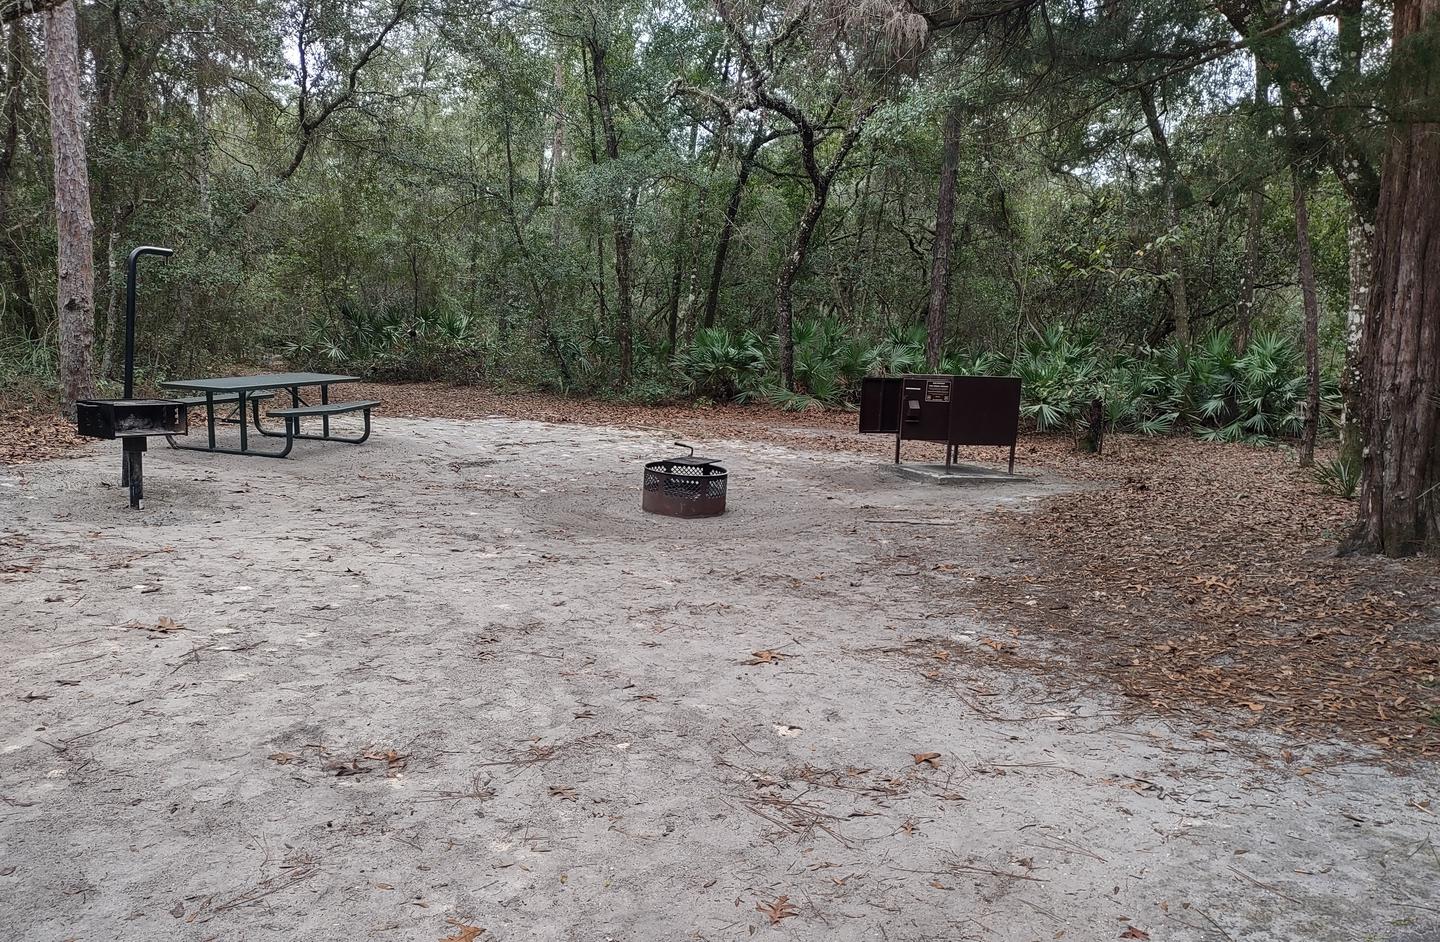 View of site 7Amenities: fire ring, picnic table, grill, light pole, bear-proof storage locker